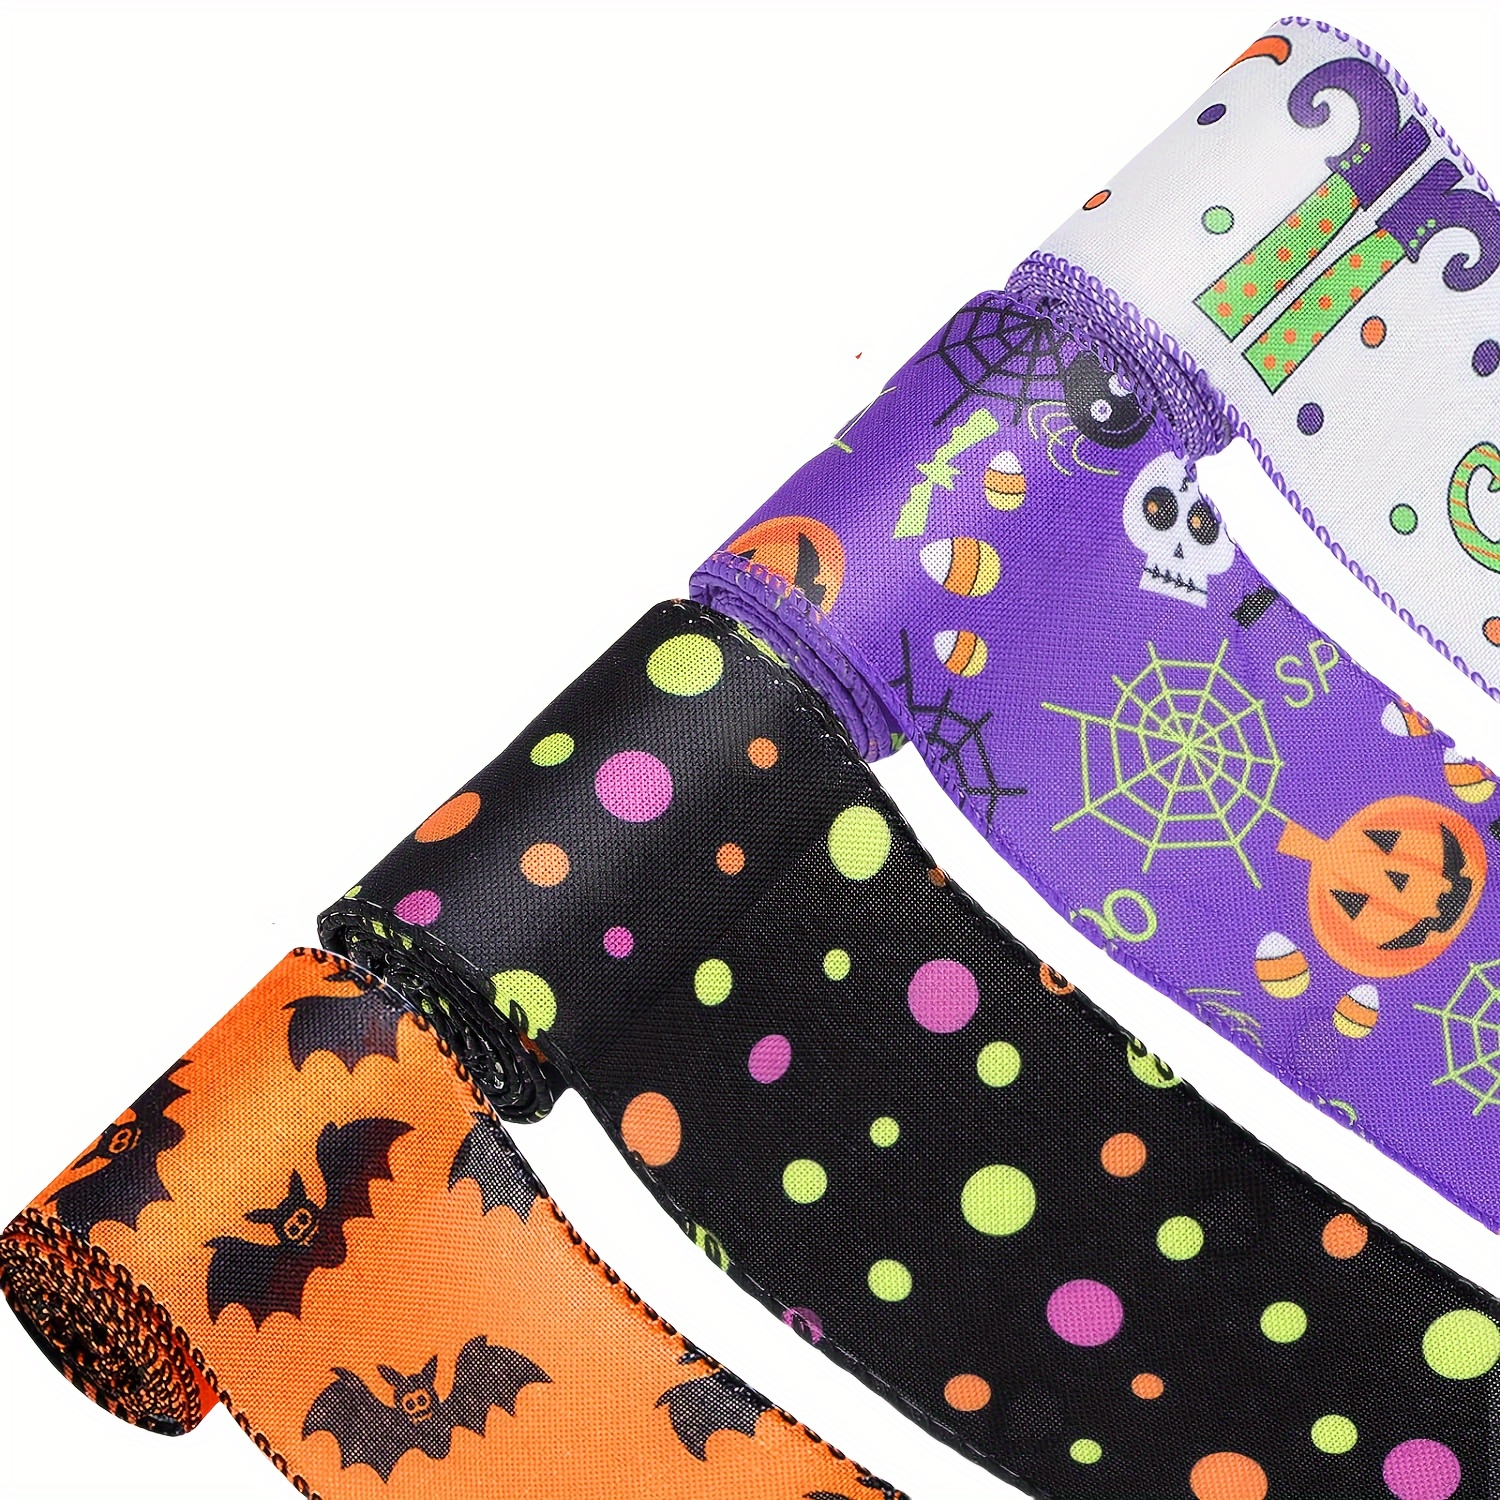 

4-piece Halloween Ribbon Set - 5 Yards Each Of Festive Spider Web & Pumpkin , Polyester Wired Edge Ribbon For Diy Crafts, Home & Party Decor